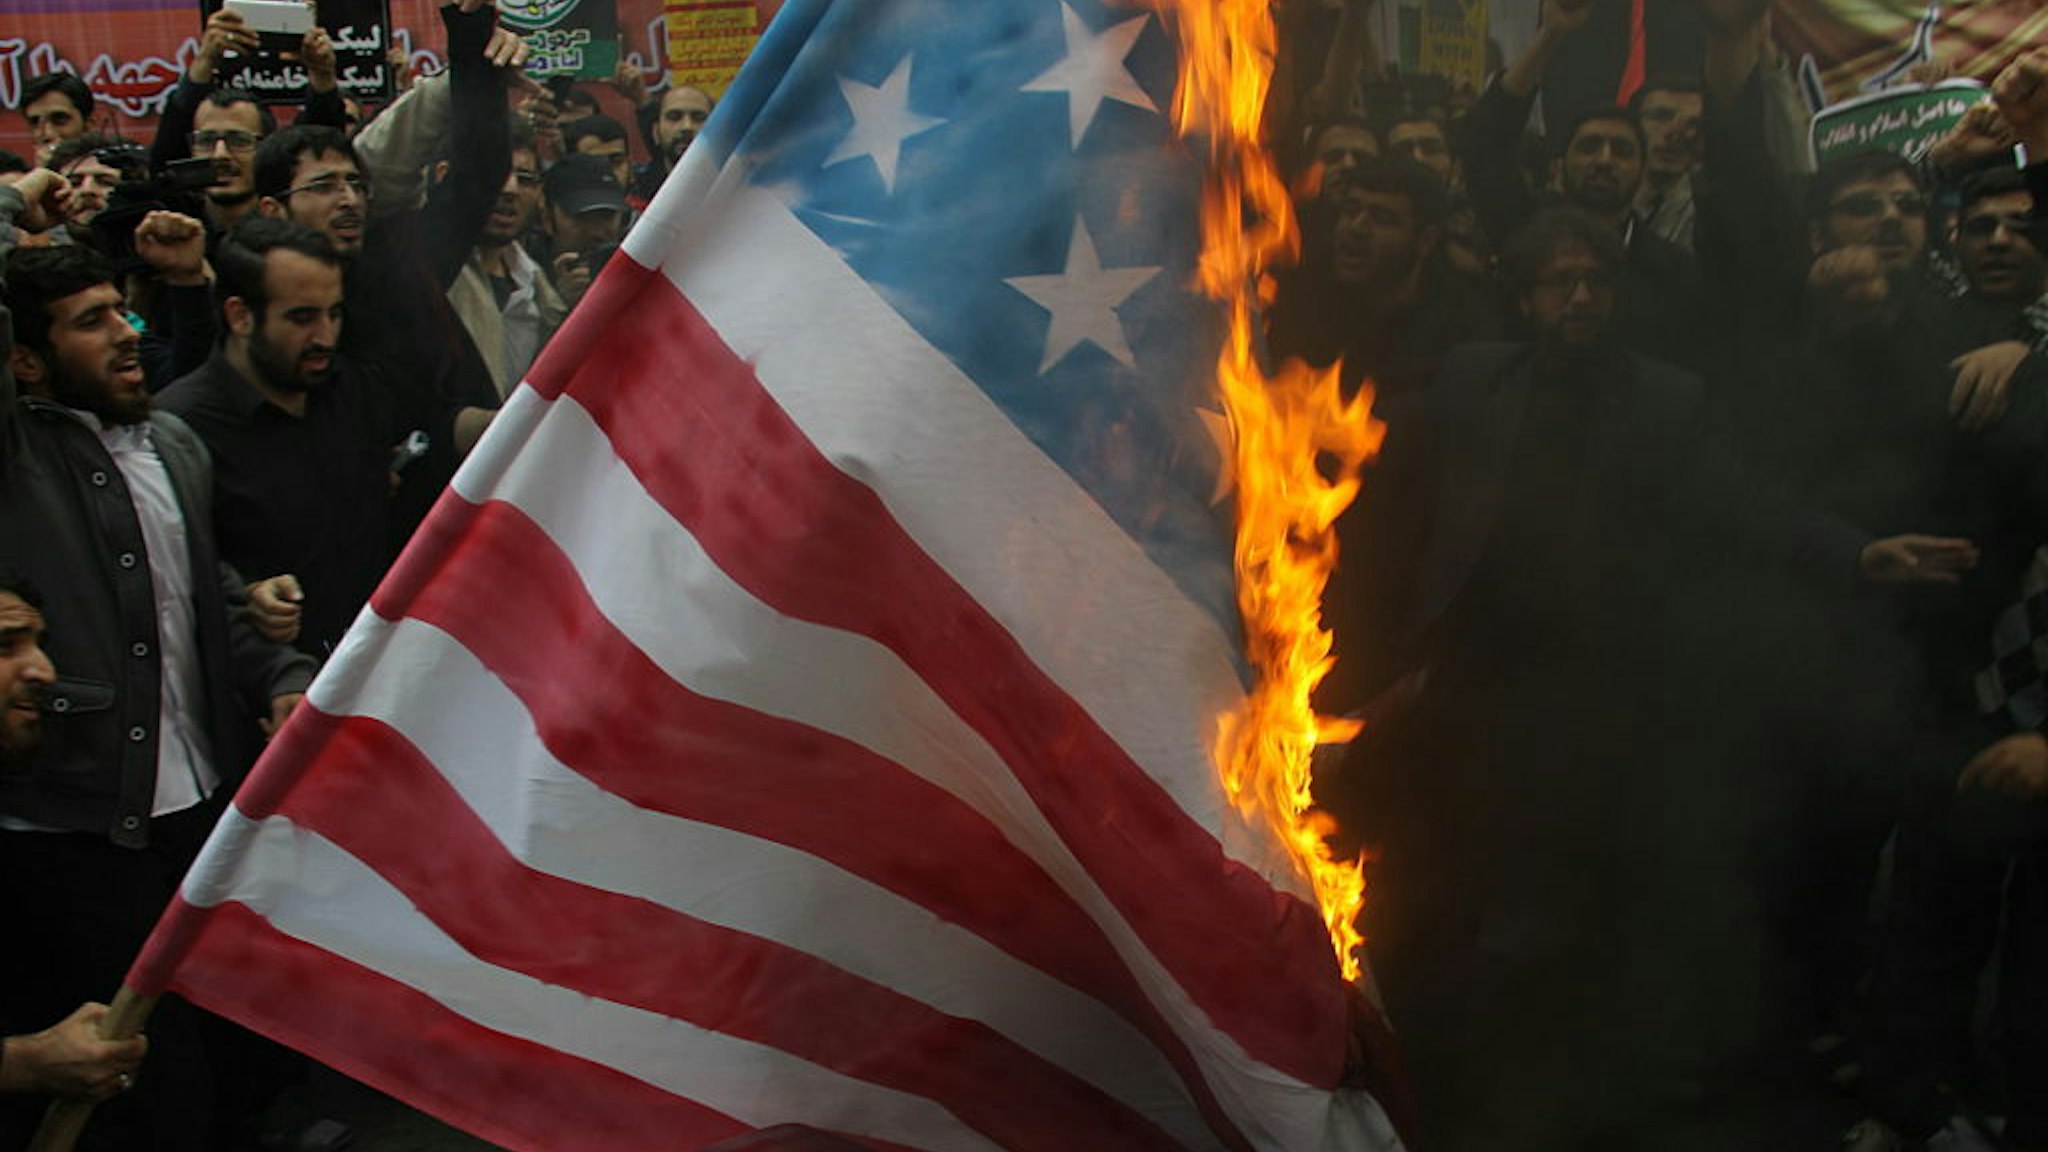 Iranians burn a US flag outside the former US embassy in the Iranian capital Tehran on November 4, 2015, during a demonstration marking the anniversary of its storming by student protesters that triggered a hostage crisis in 1979. Thousands of